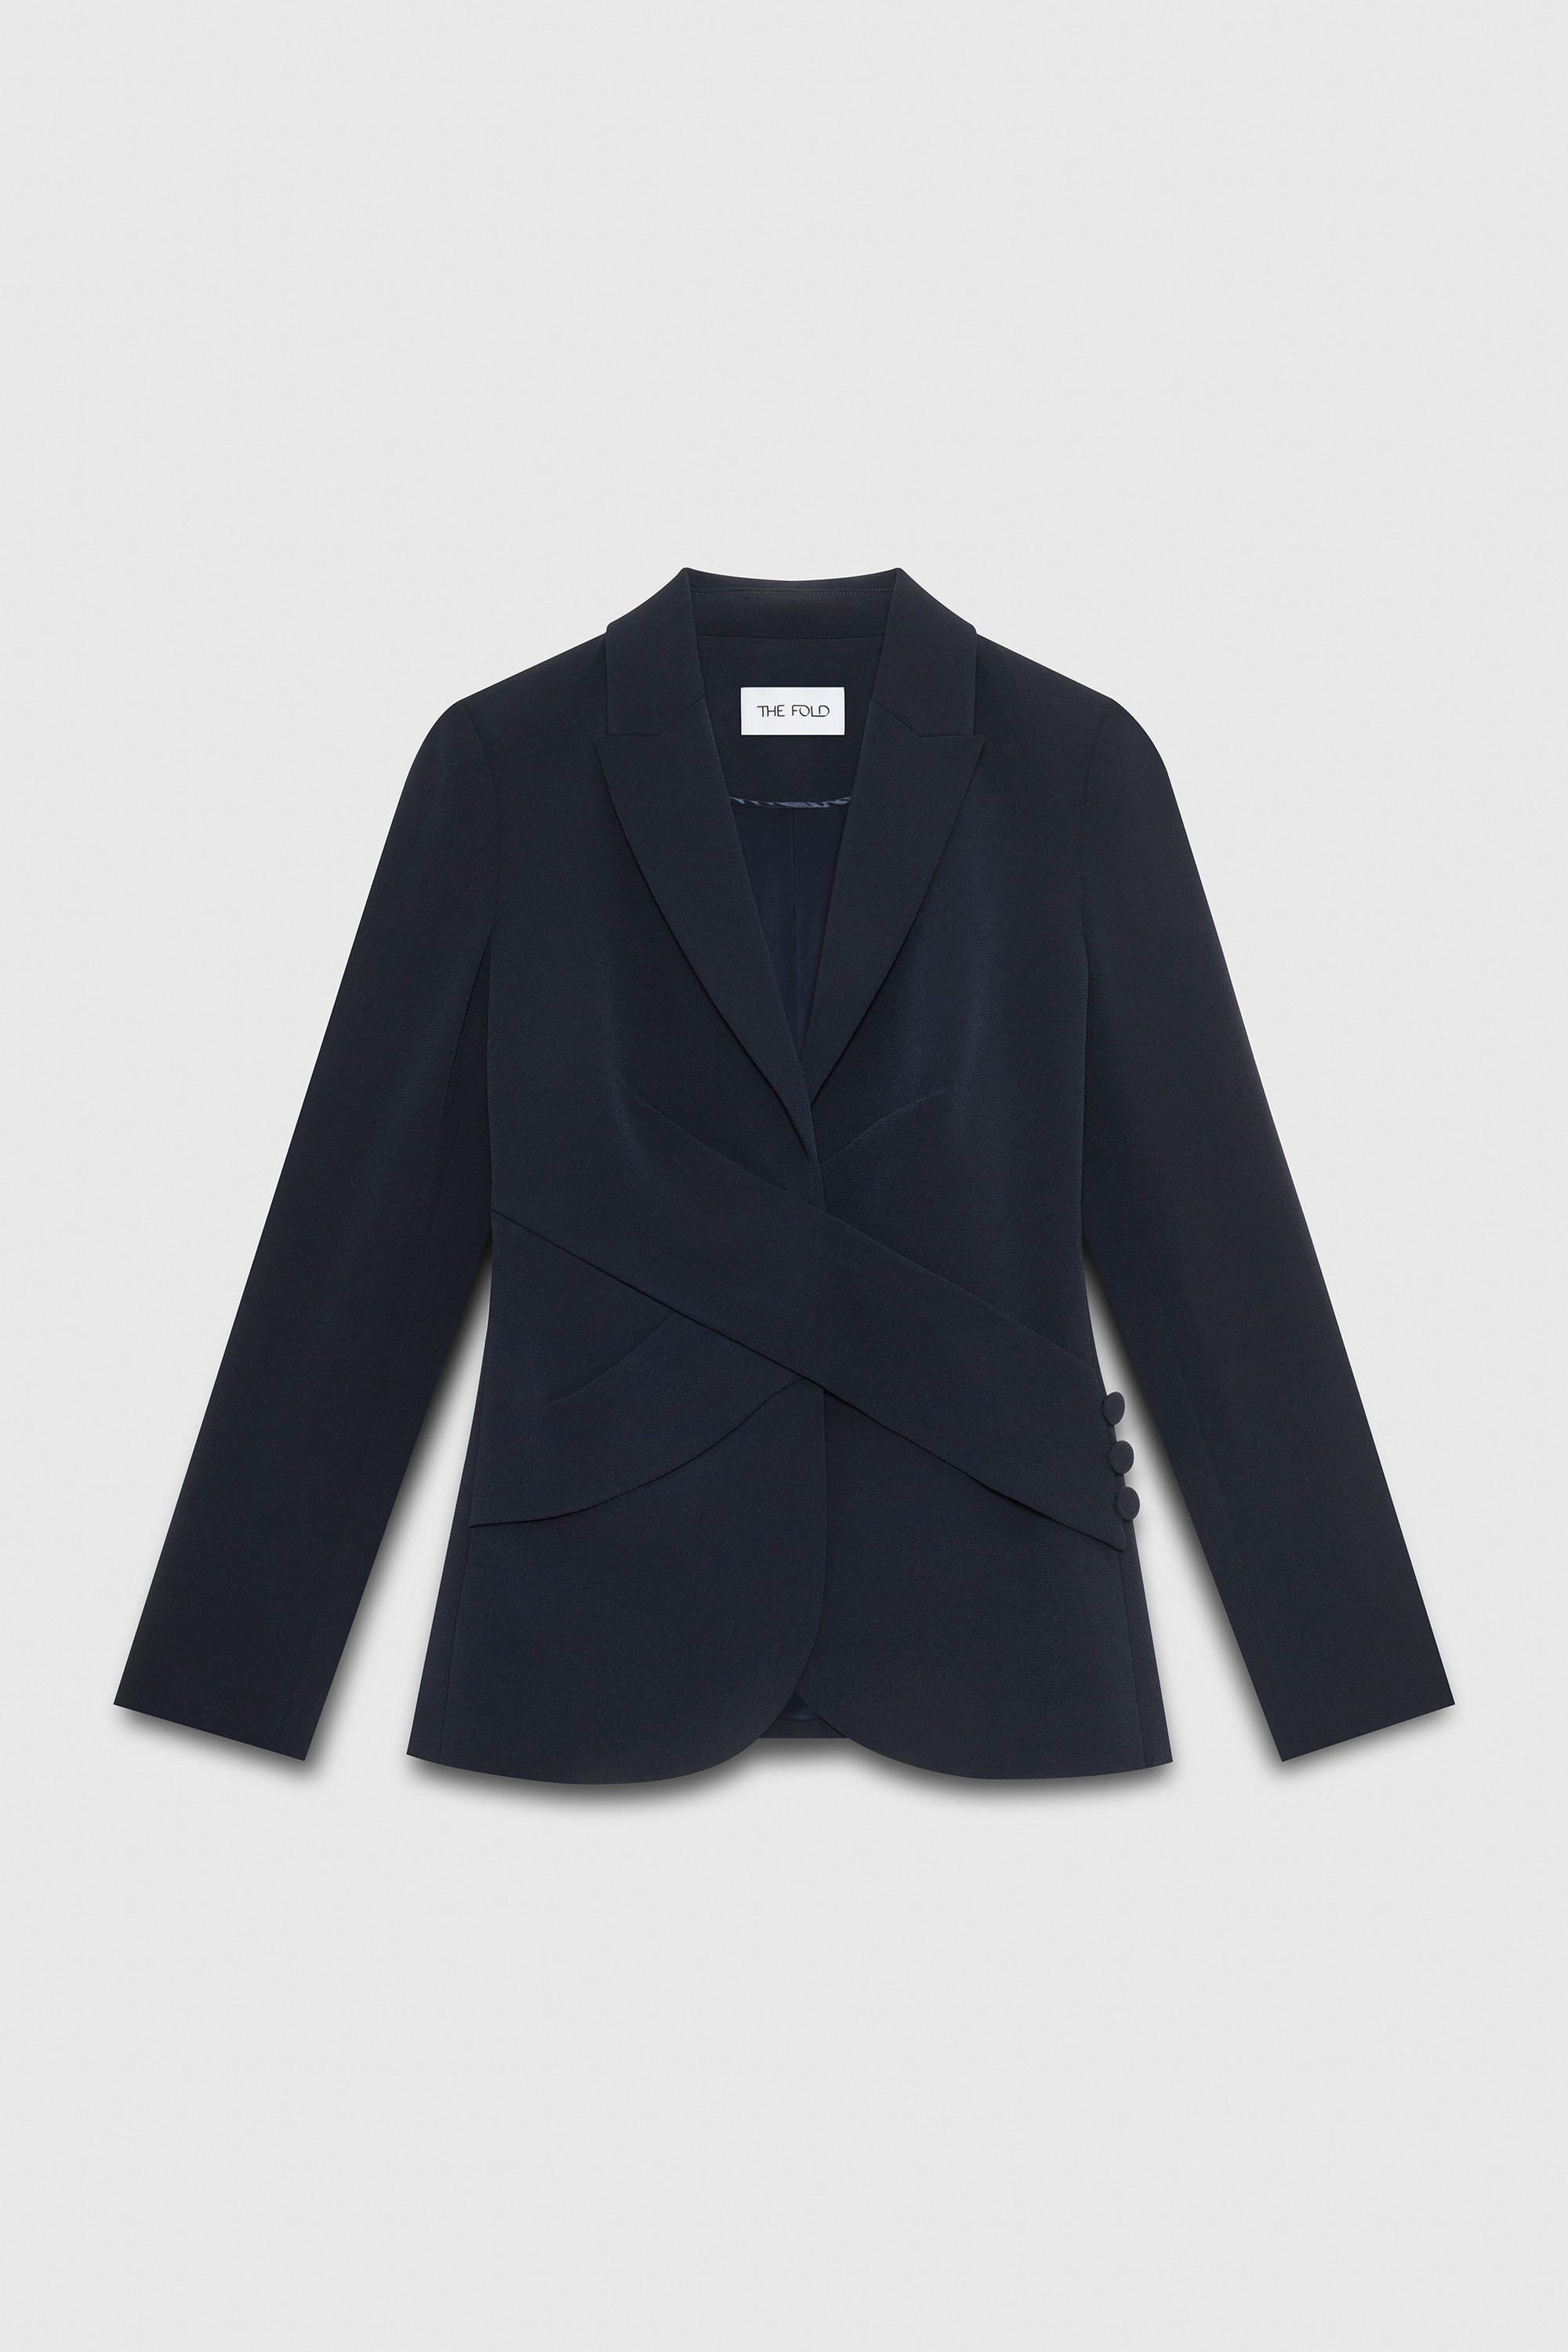 Clever Crepe Averill Wrap Jacket Navy - Welcome to the Fold LTD